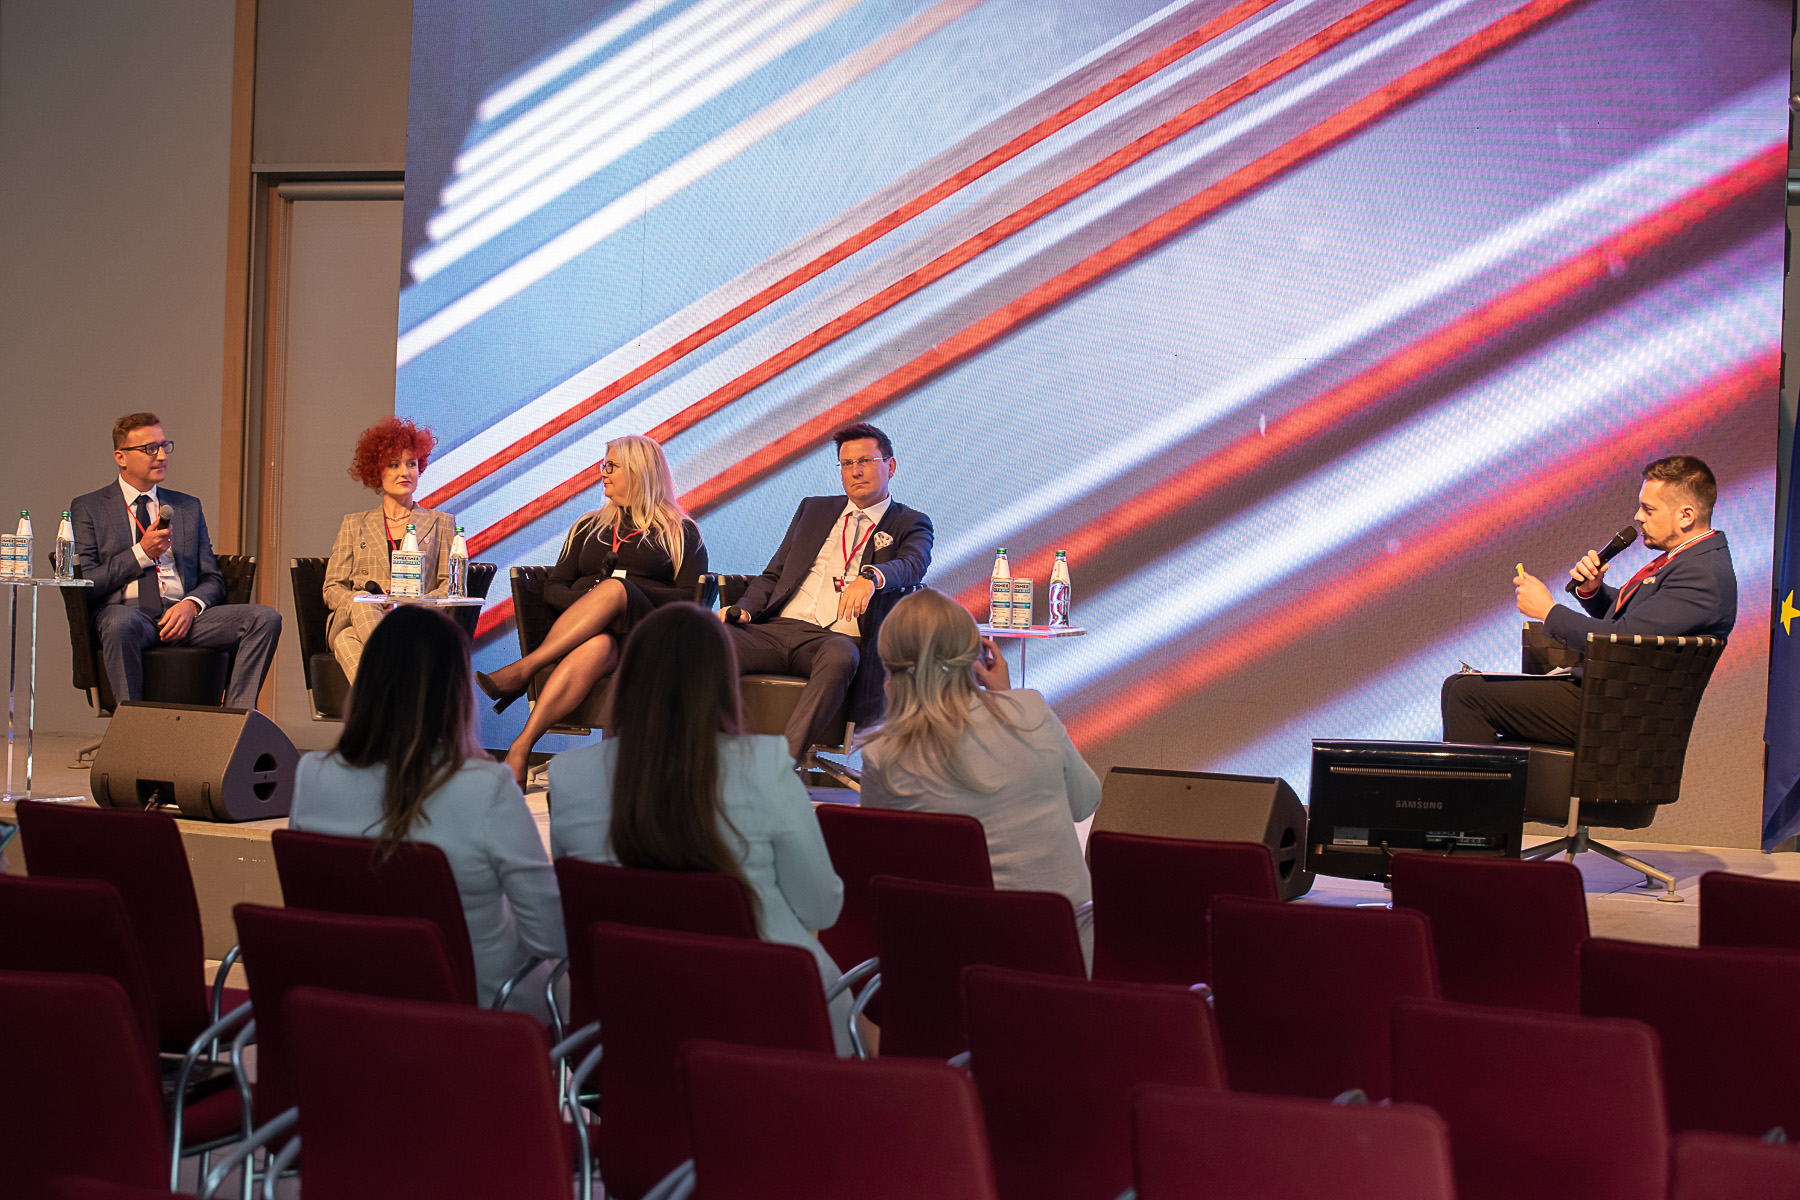 Agnieszka Szewczyk, the owner and president of C.P.E.T. Kedarix, took part in the discussion panel